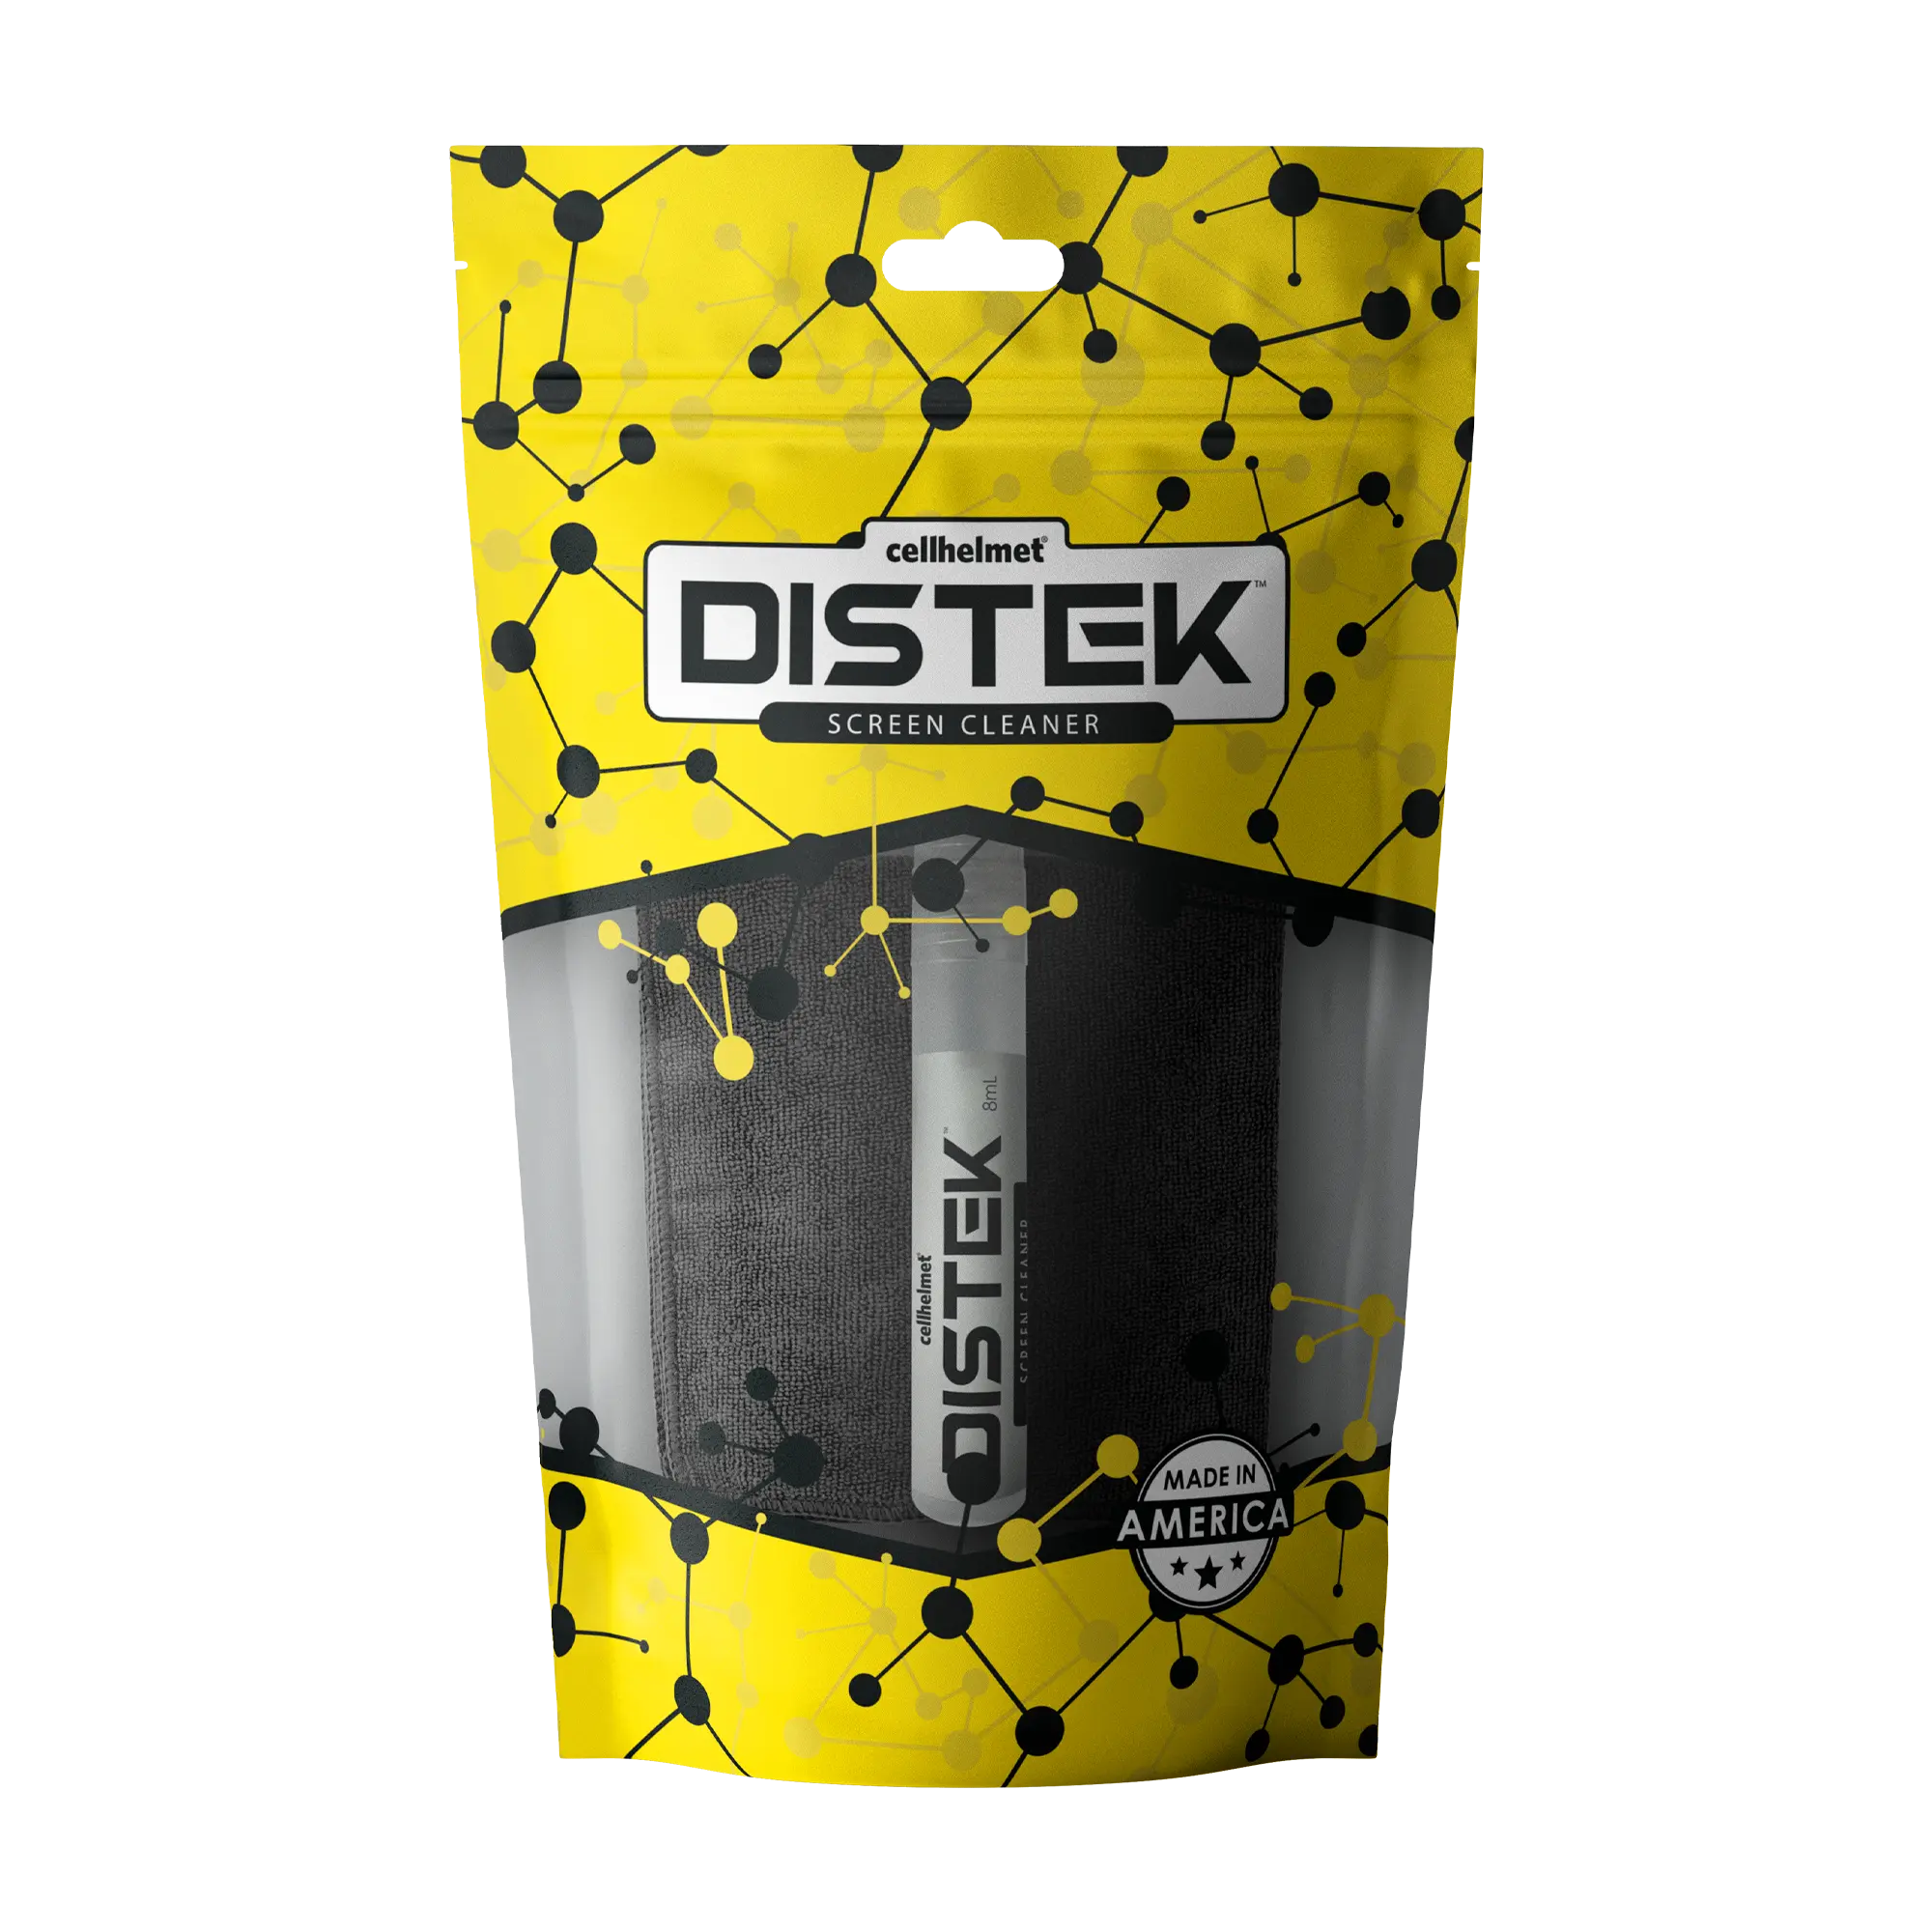 DISTEK Screen and Phone Cleaner with Cleaning Cloth - Screen Cleaner - 8mL - cellhelmet